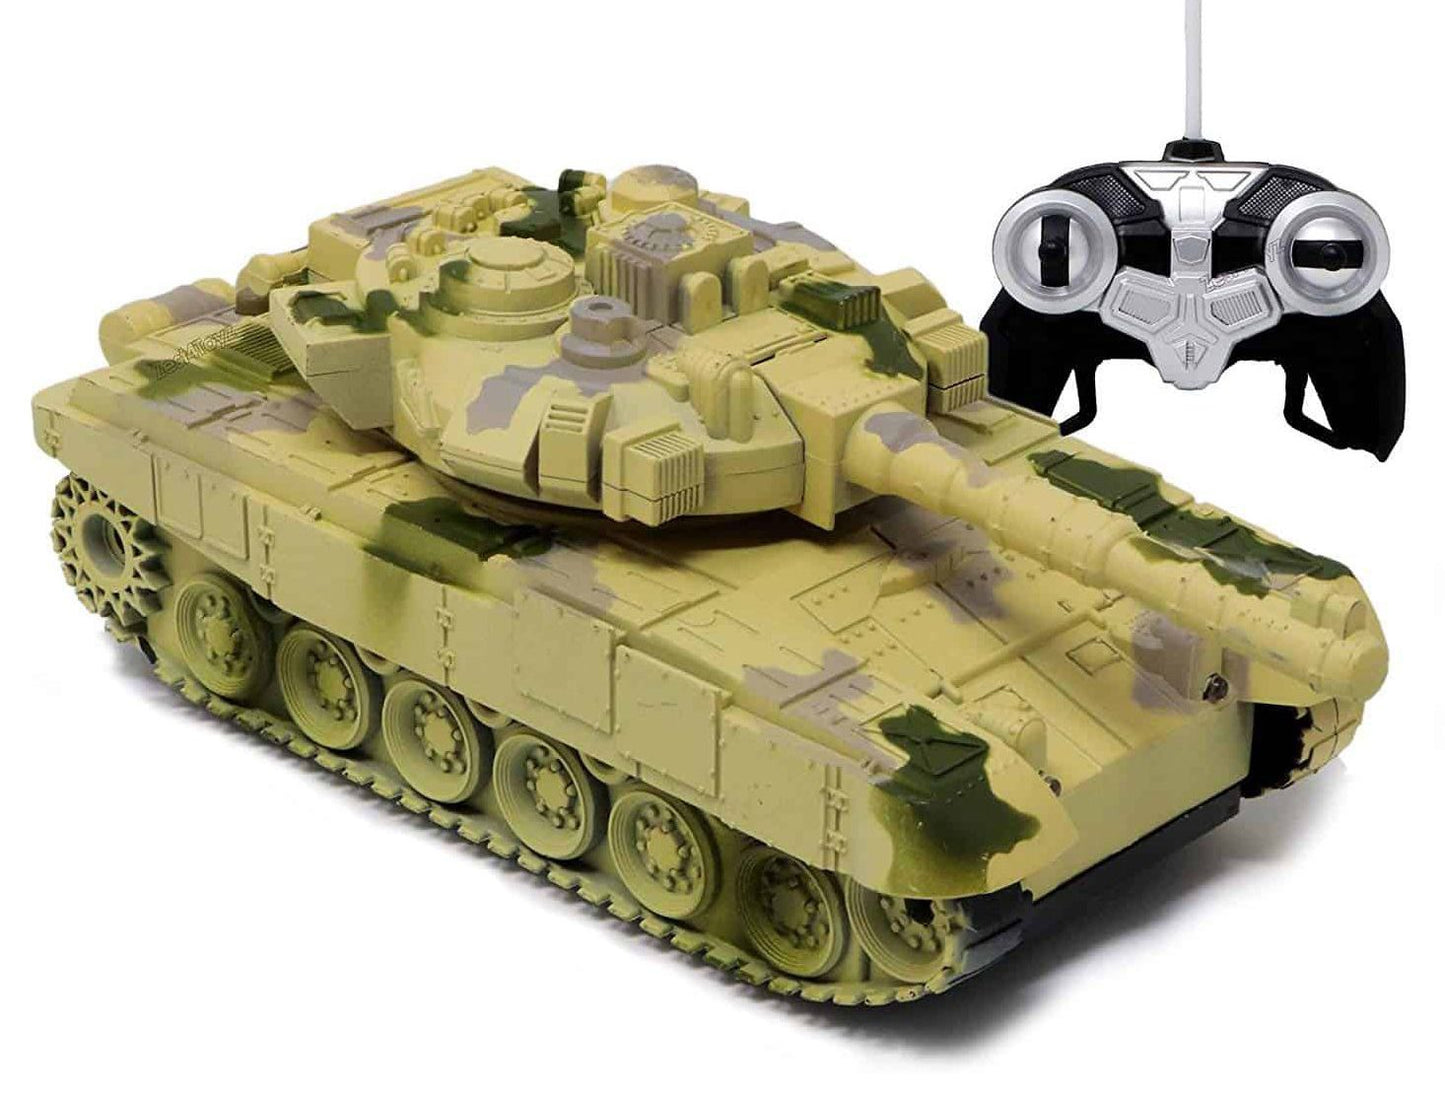 Remote Control Army Battle Tank-Rotating Turret with Light & Sound for Kids in Assorted Colors